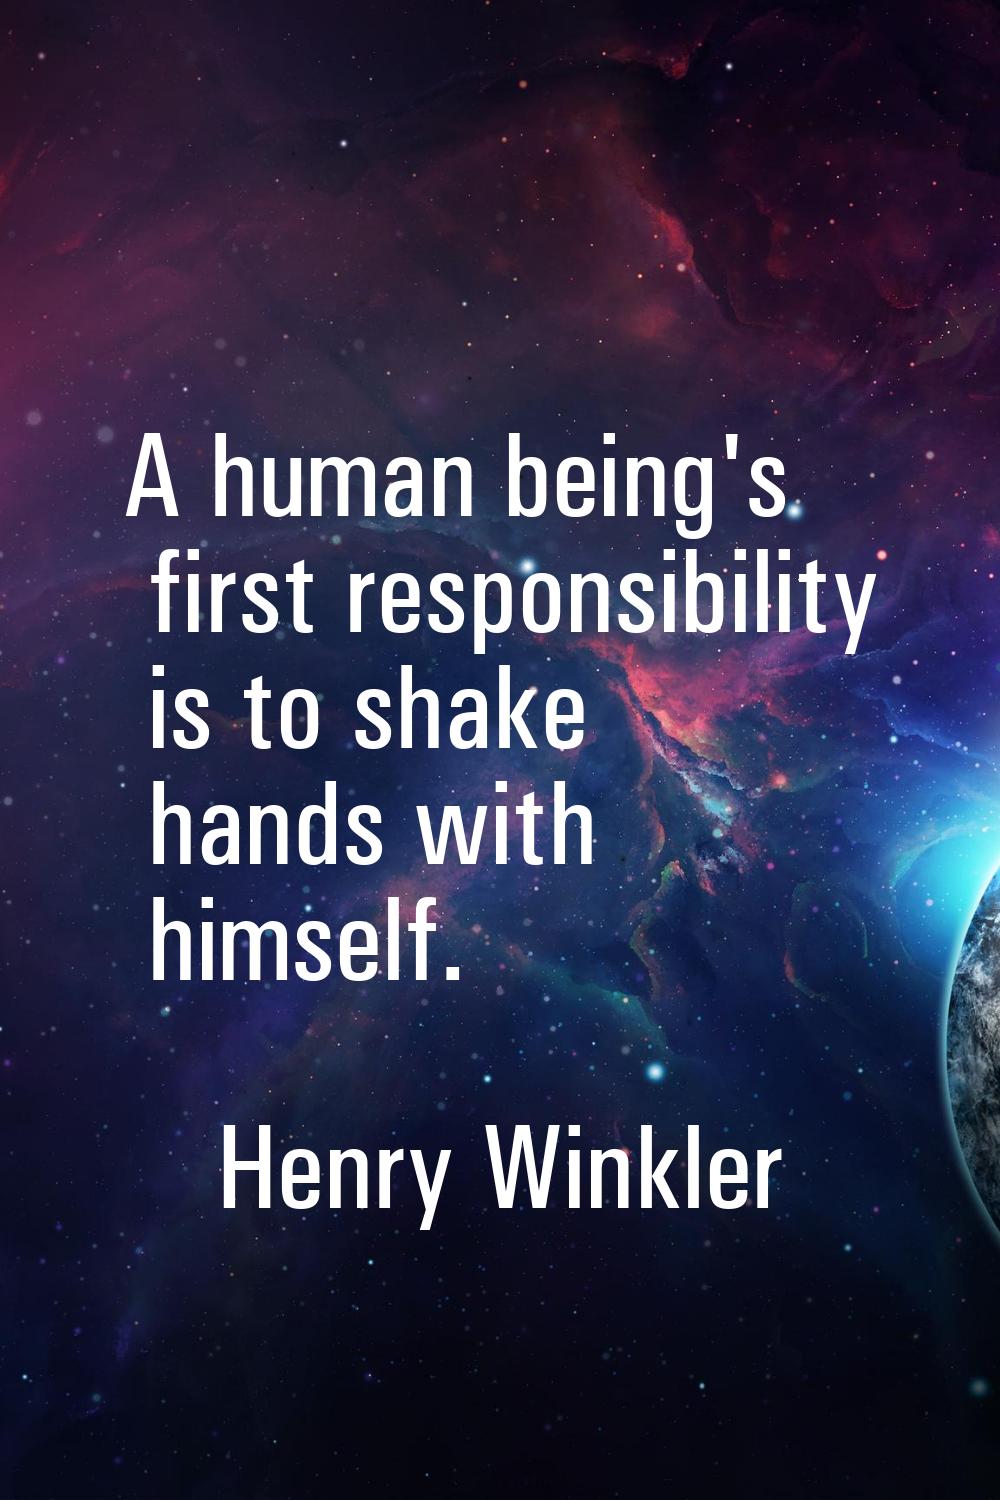 A human being's first responsibility is to shake hands with himself.